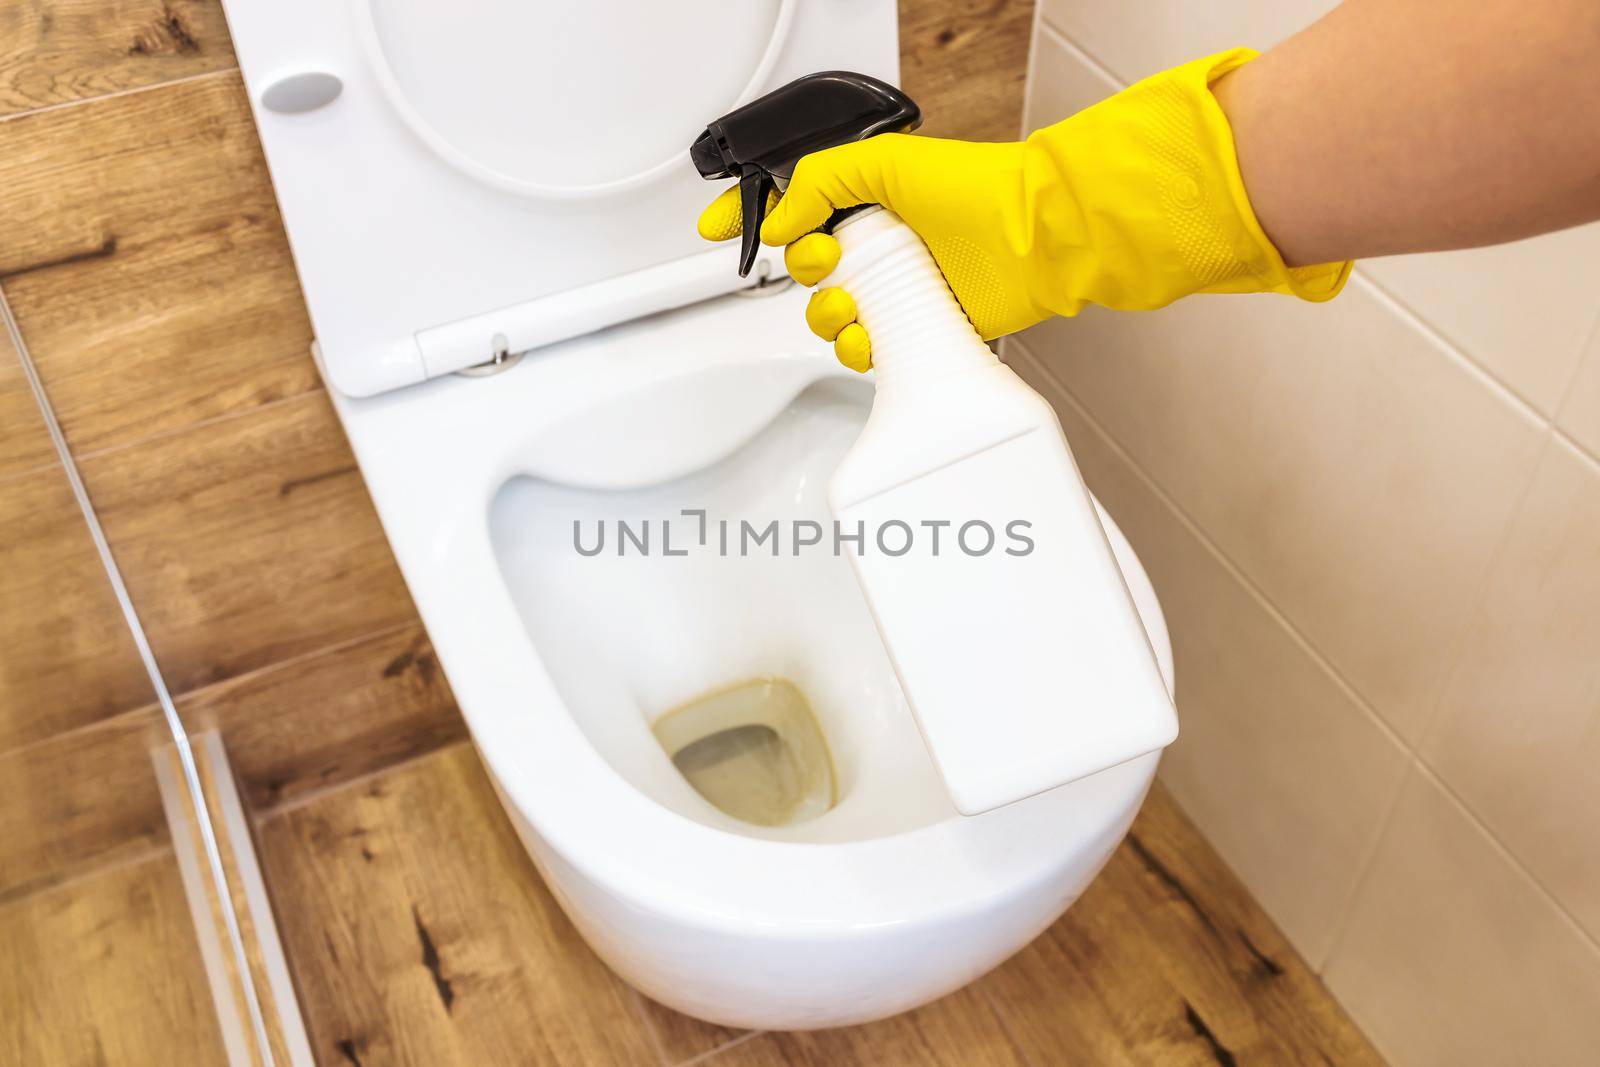 Mockup of plastic white bottle with toilet cleaner, place for logo. Close-up of female hands in yellow protective gloves using detergent solution for toilet cleaning, disinfection and hygiene concept